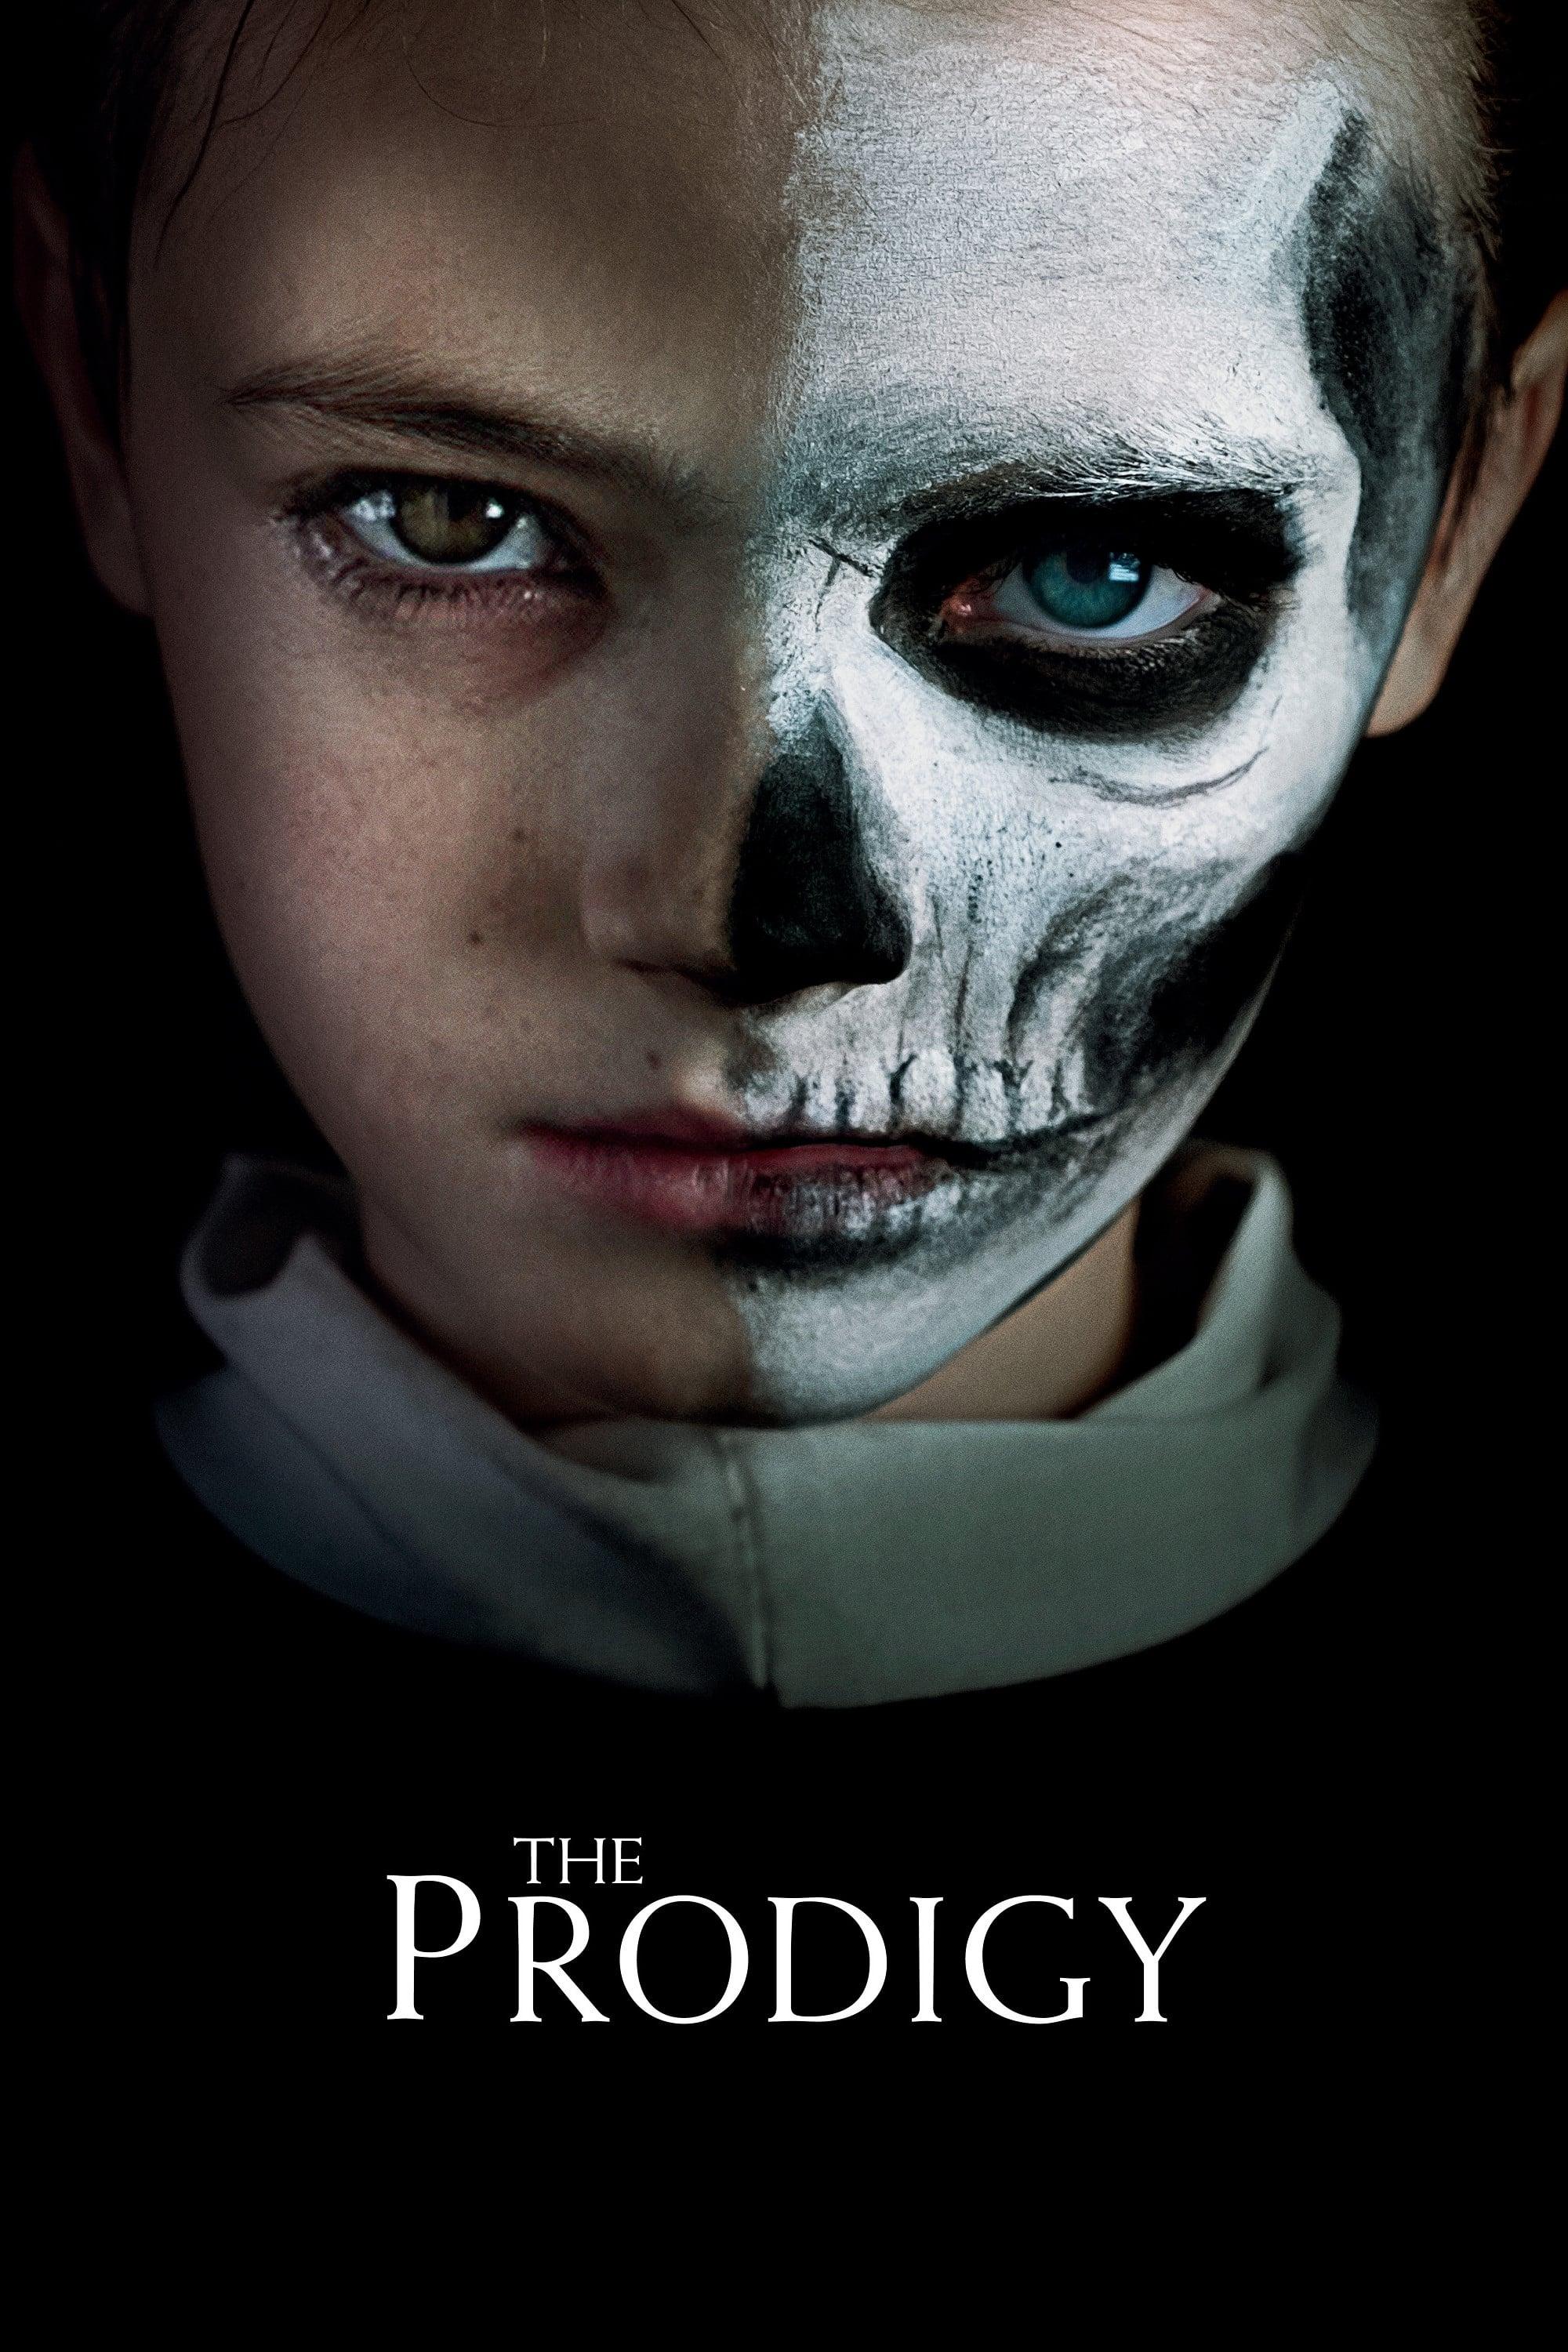 The Prodigy poster